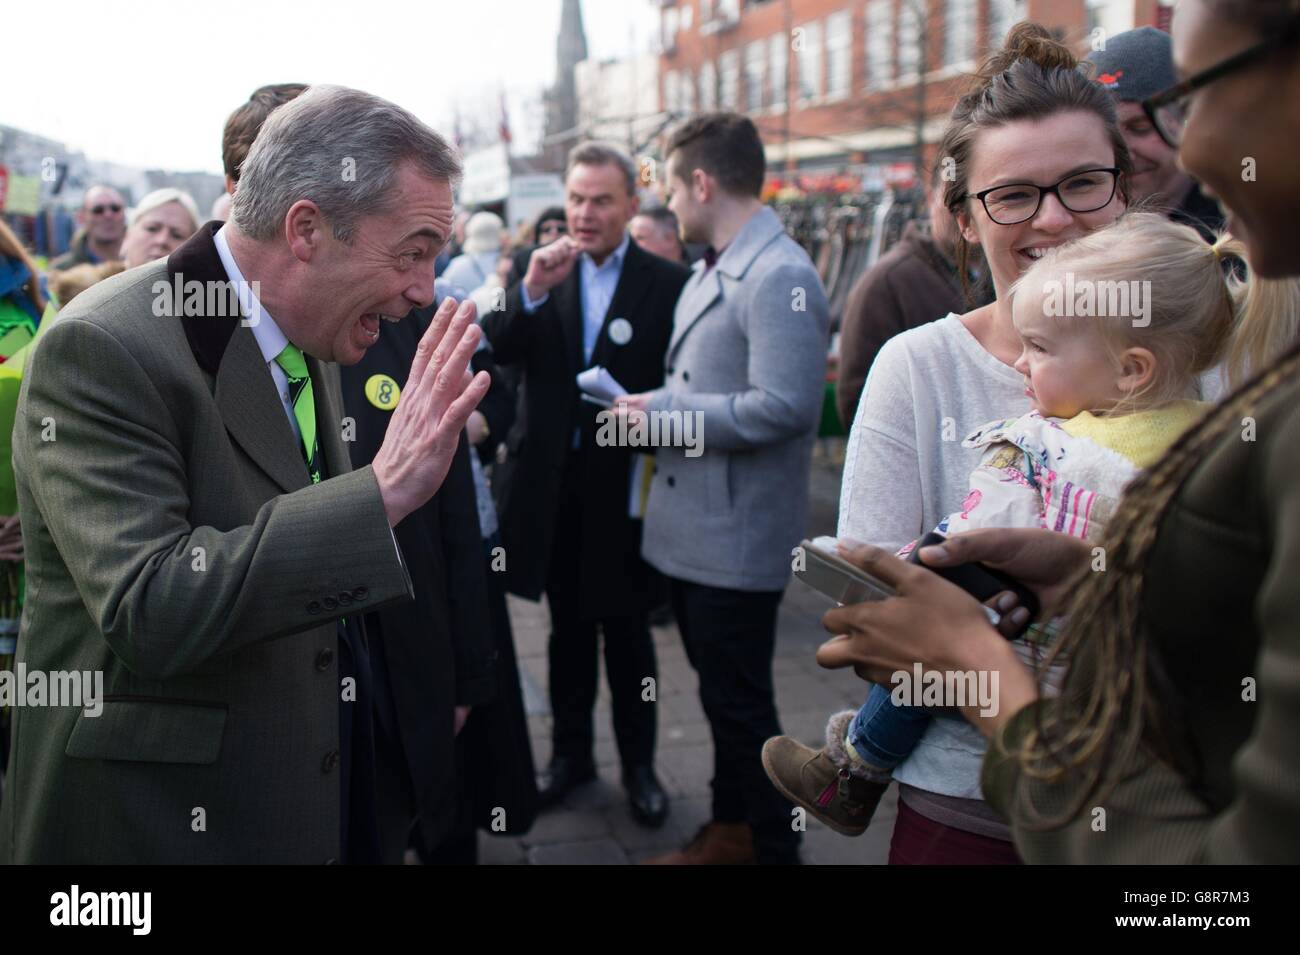 UKIP leader Nigel Farage campaigns for Britain to leave the EU during a walkabout, in support of Brexit campaign's 'super Saturday', in Romford Market in Essex where he met shoppers and local Conservative MP Andrew Rosindell. Stock Photo